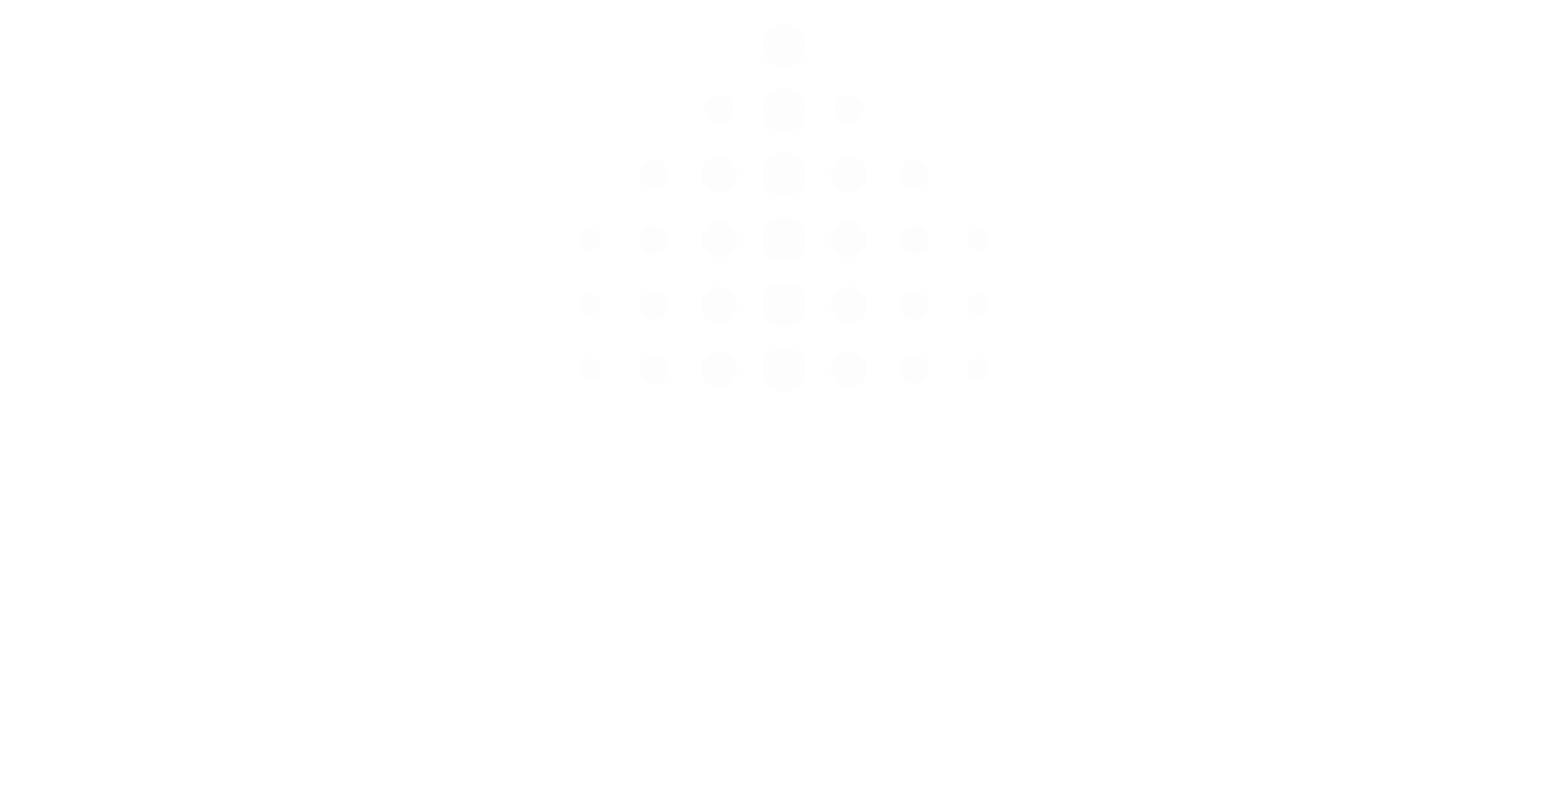 Clayhall Financial Services